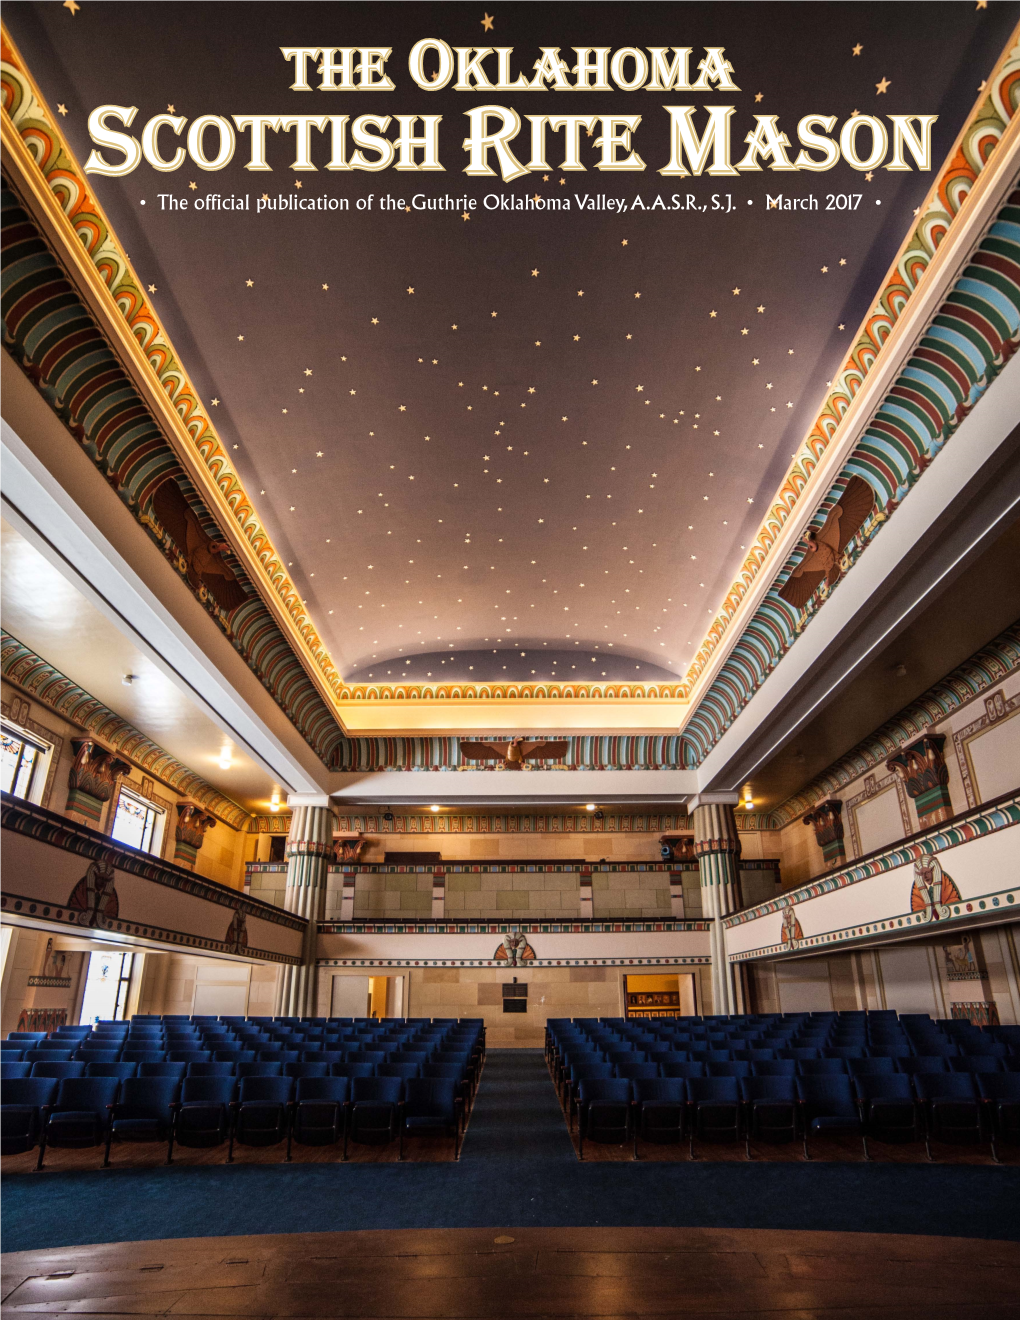 Scottish Rite Mason • the Official Publication of the Guthrie Oklahoma Valley, A.A.S.R., S.J